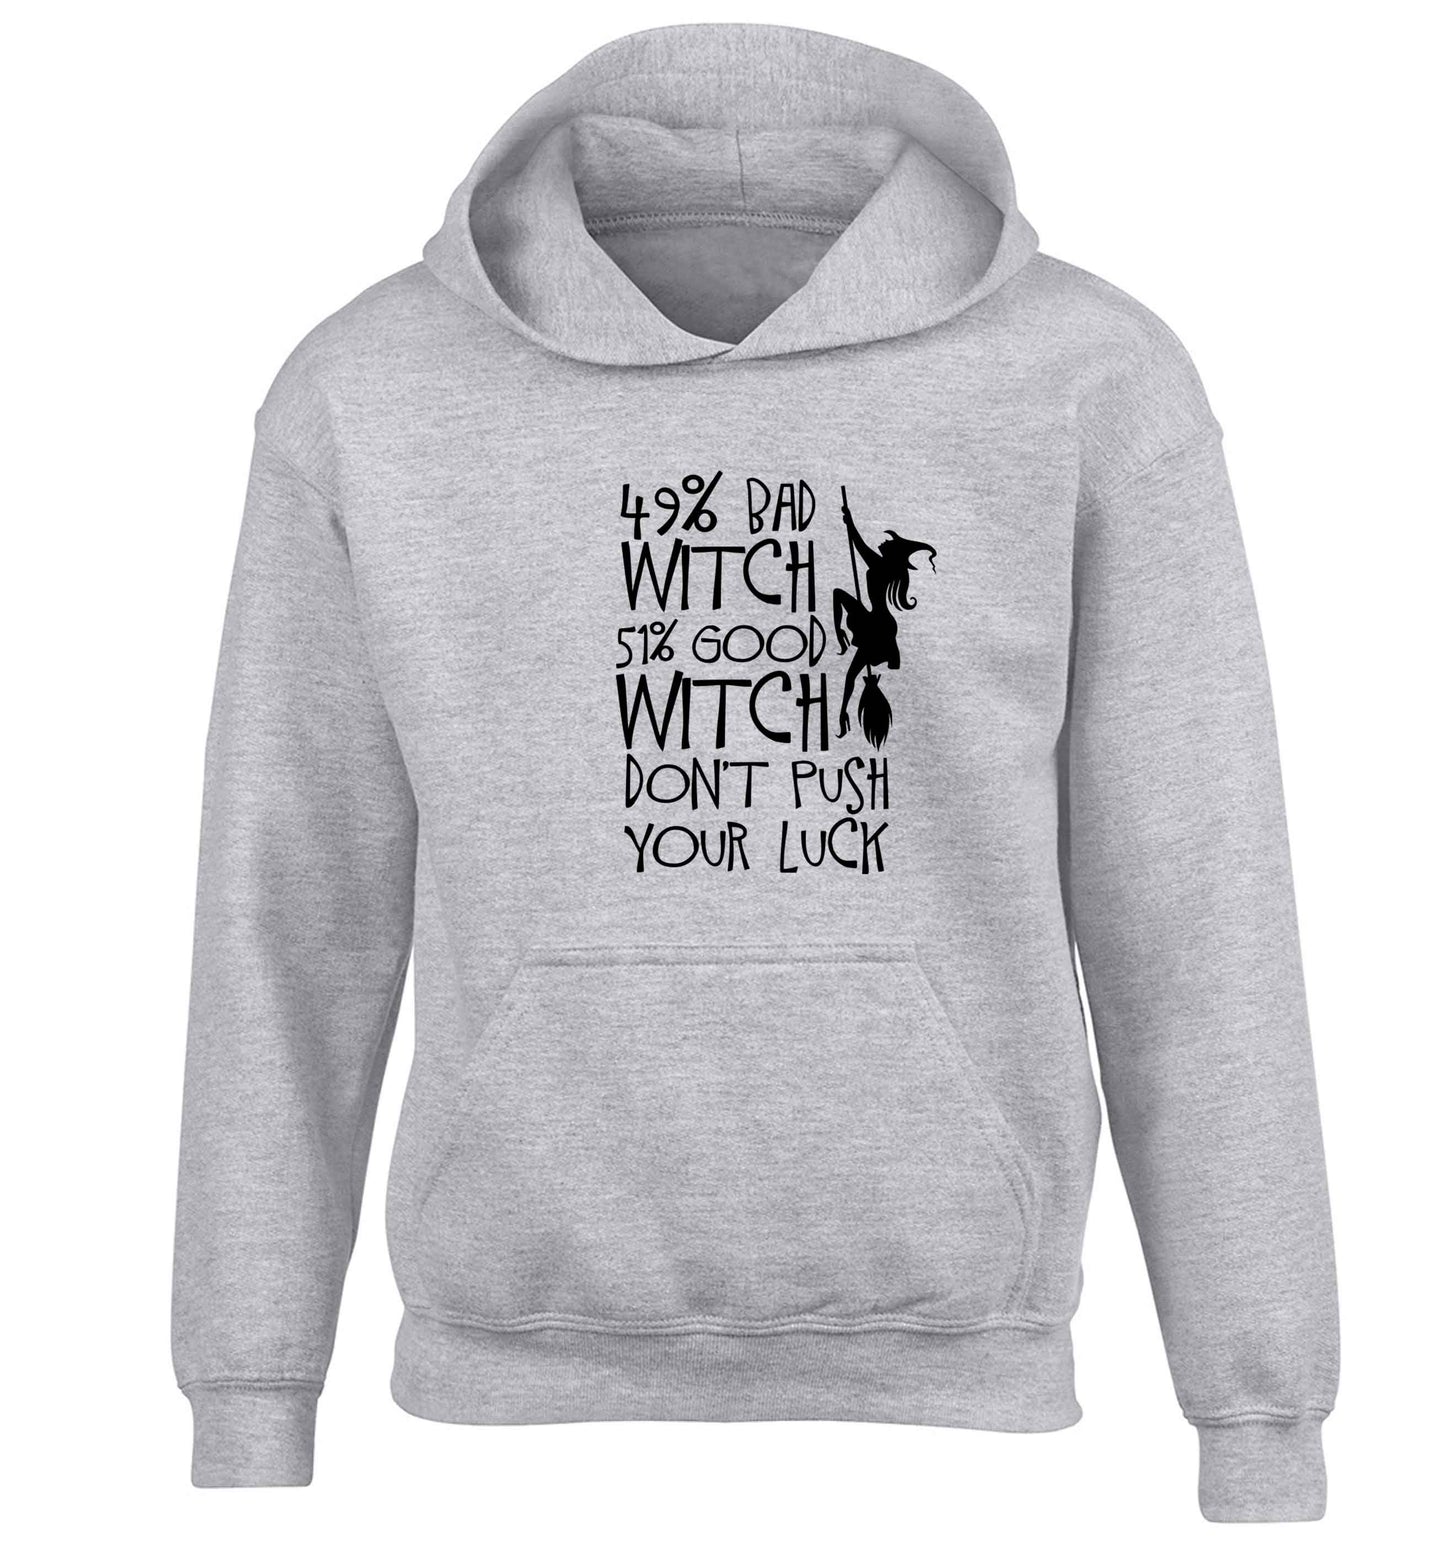 49% bad witch 51% good witch don't push your luck children's grey hoodie 12-13 Years